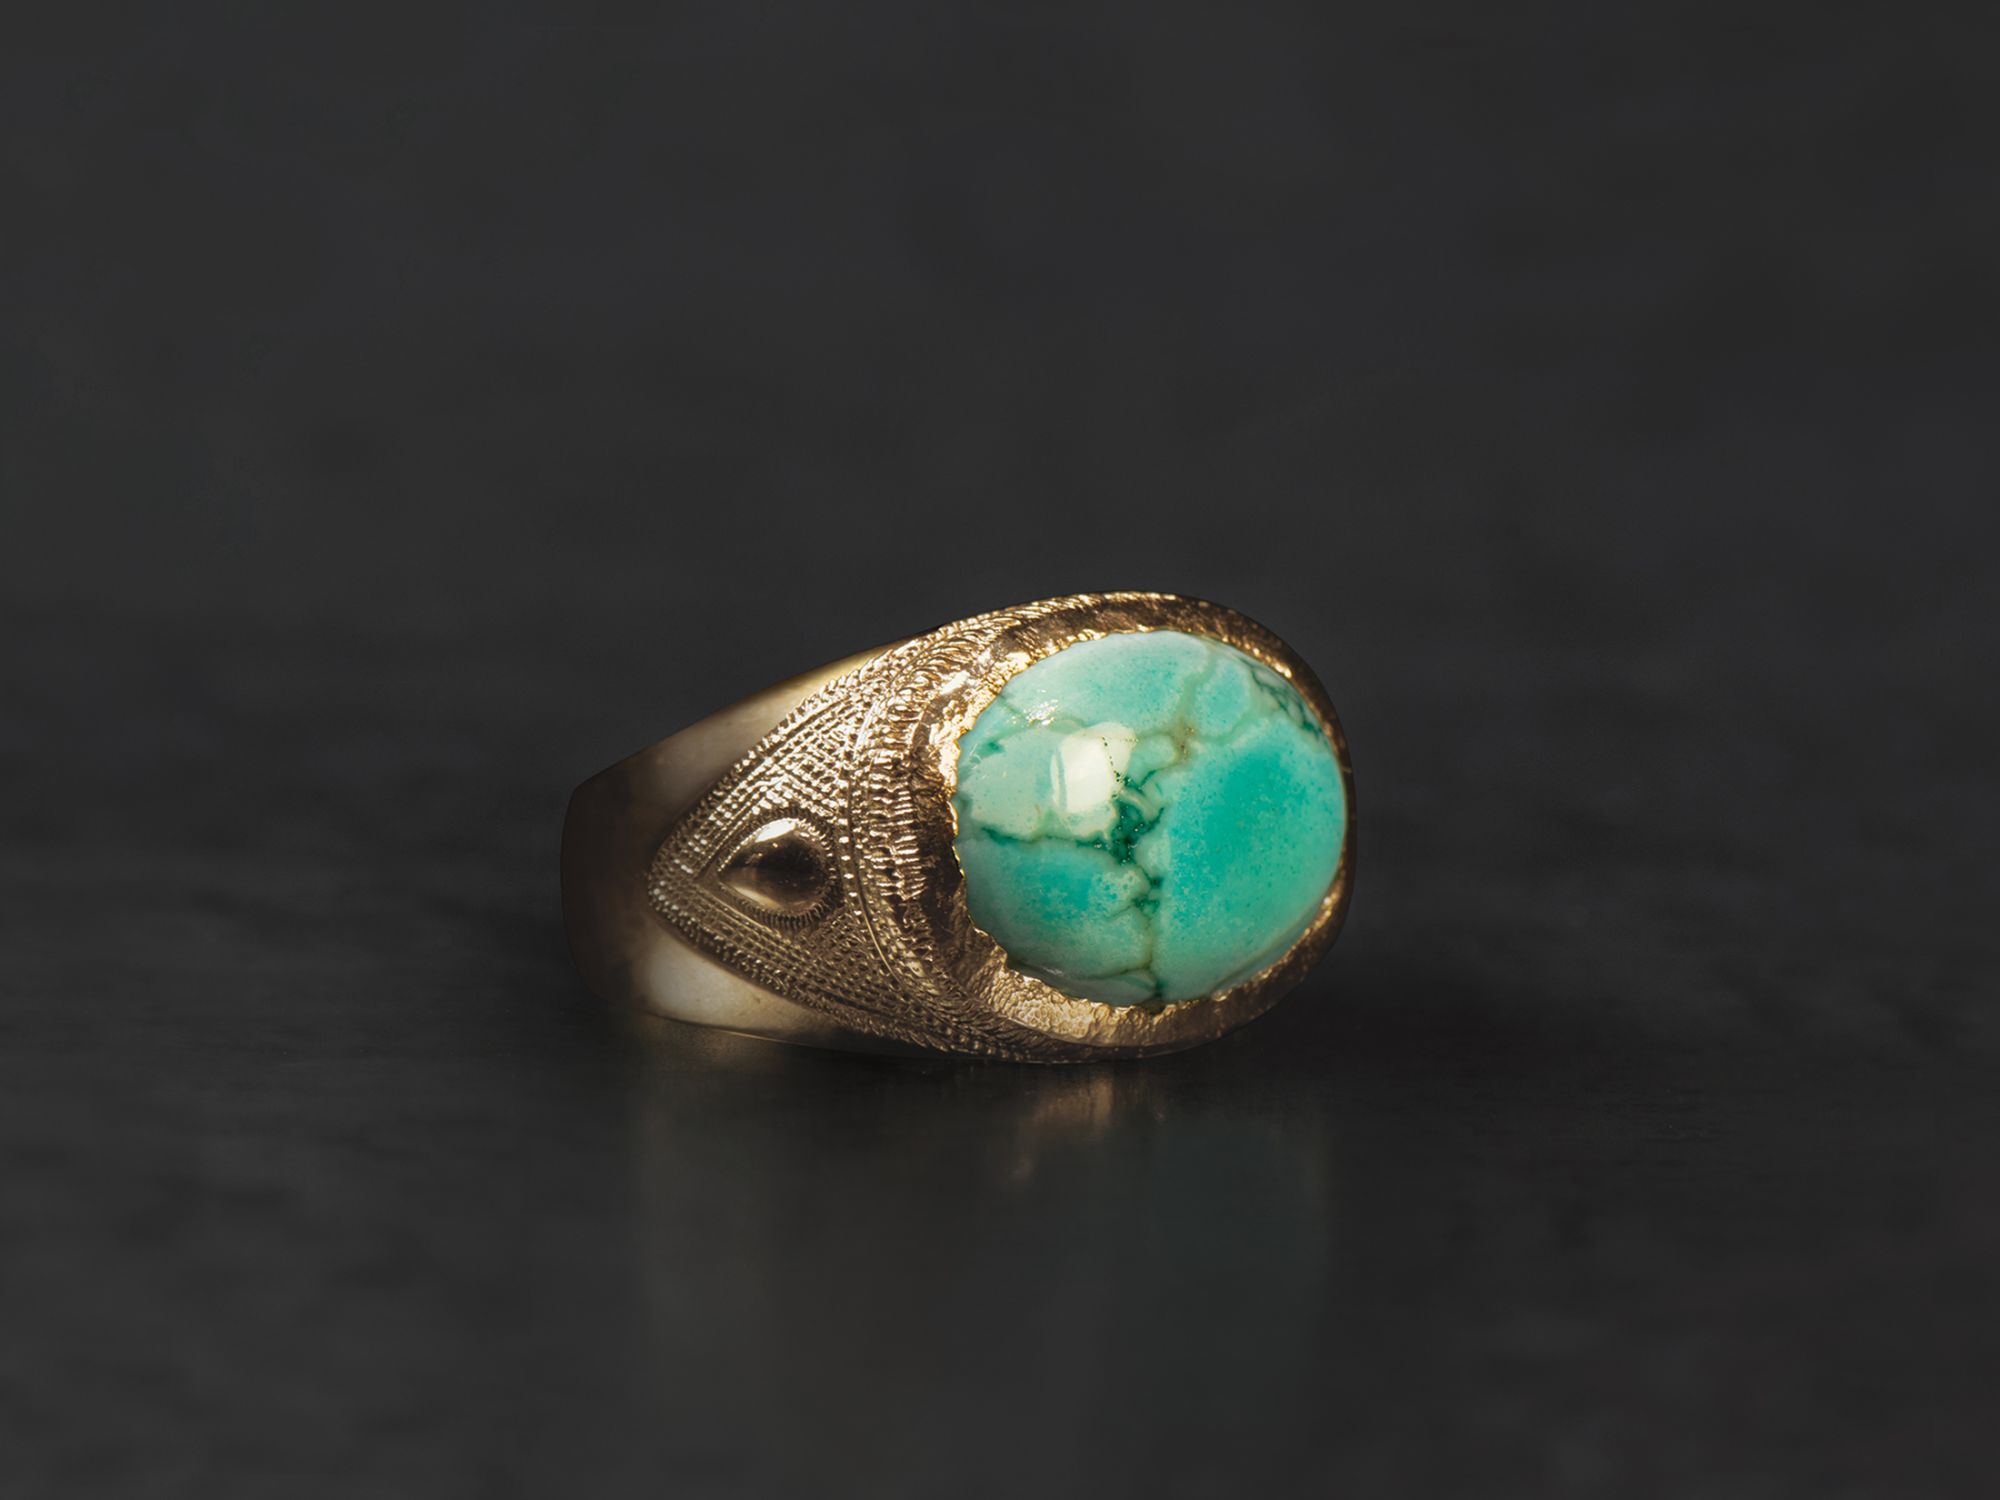 Ispahan Vermeil and Turquoise Ring by Emmanuelle Zysman